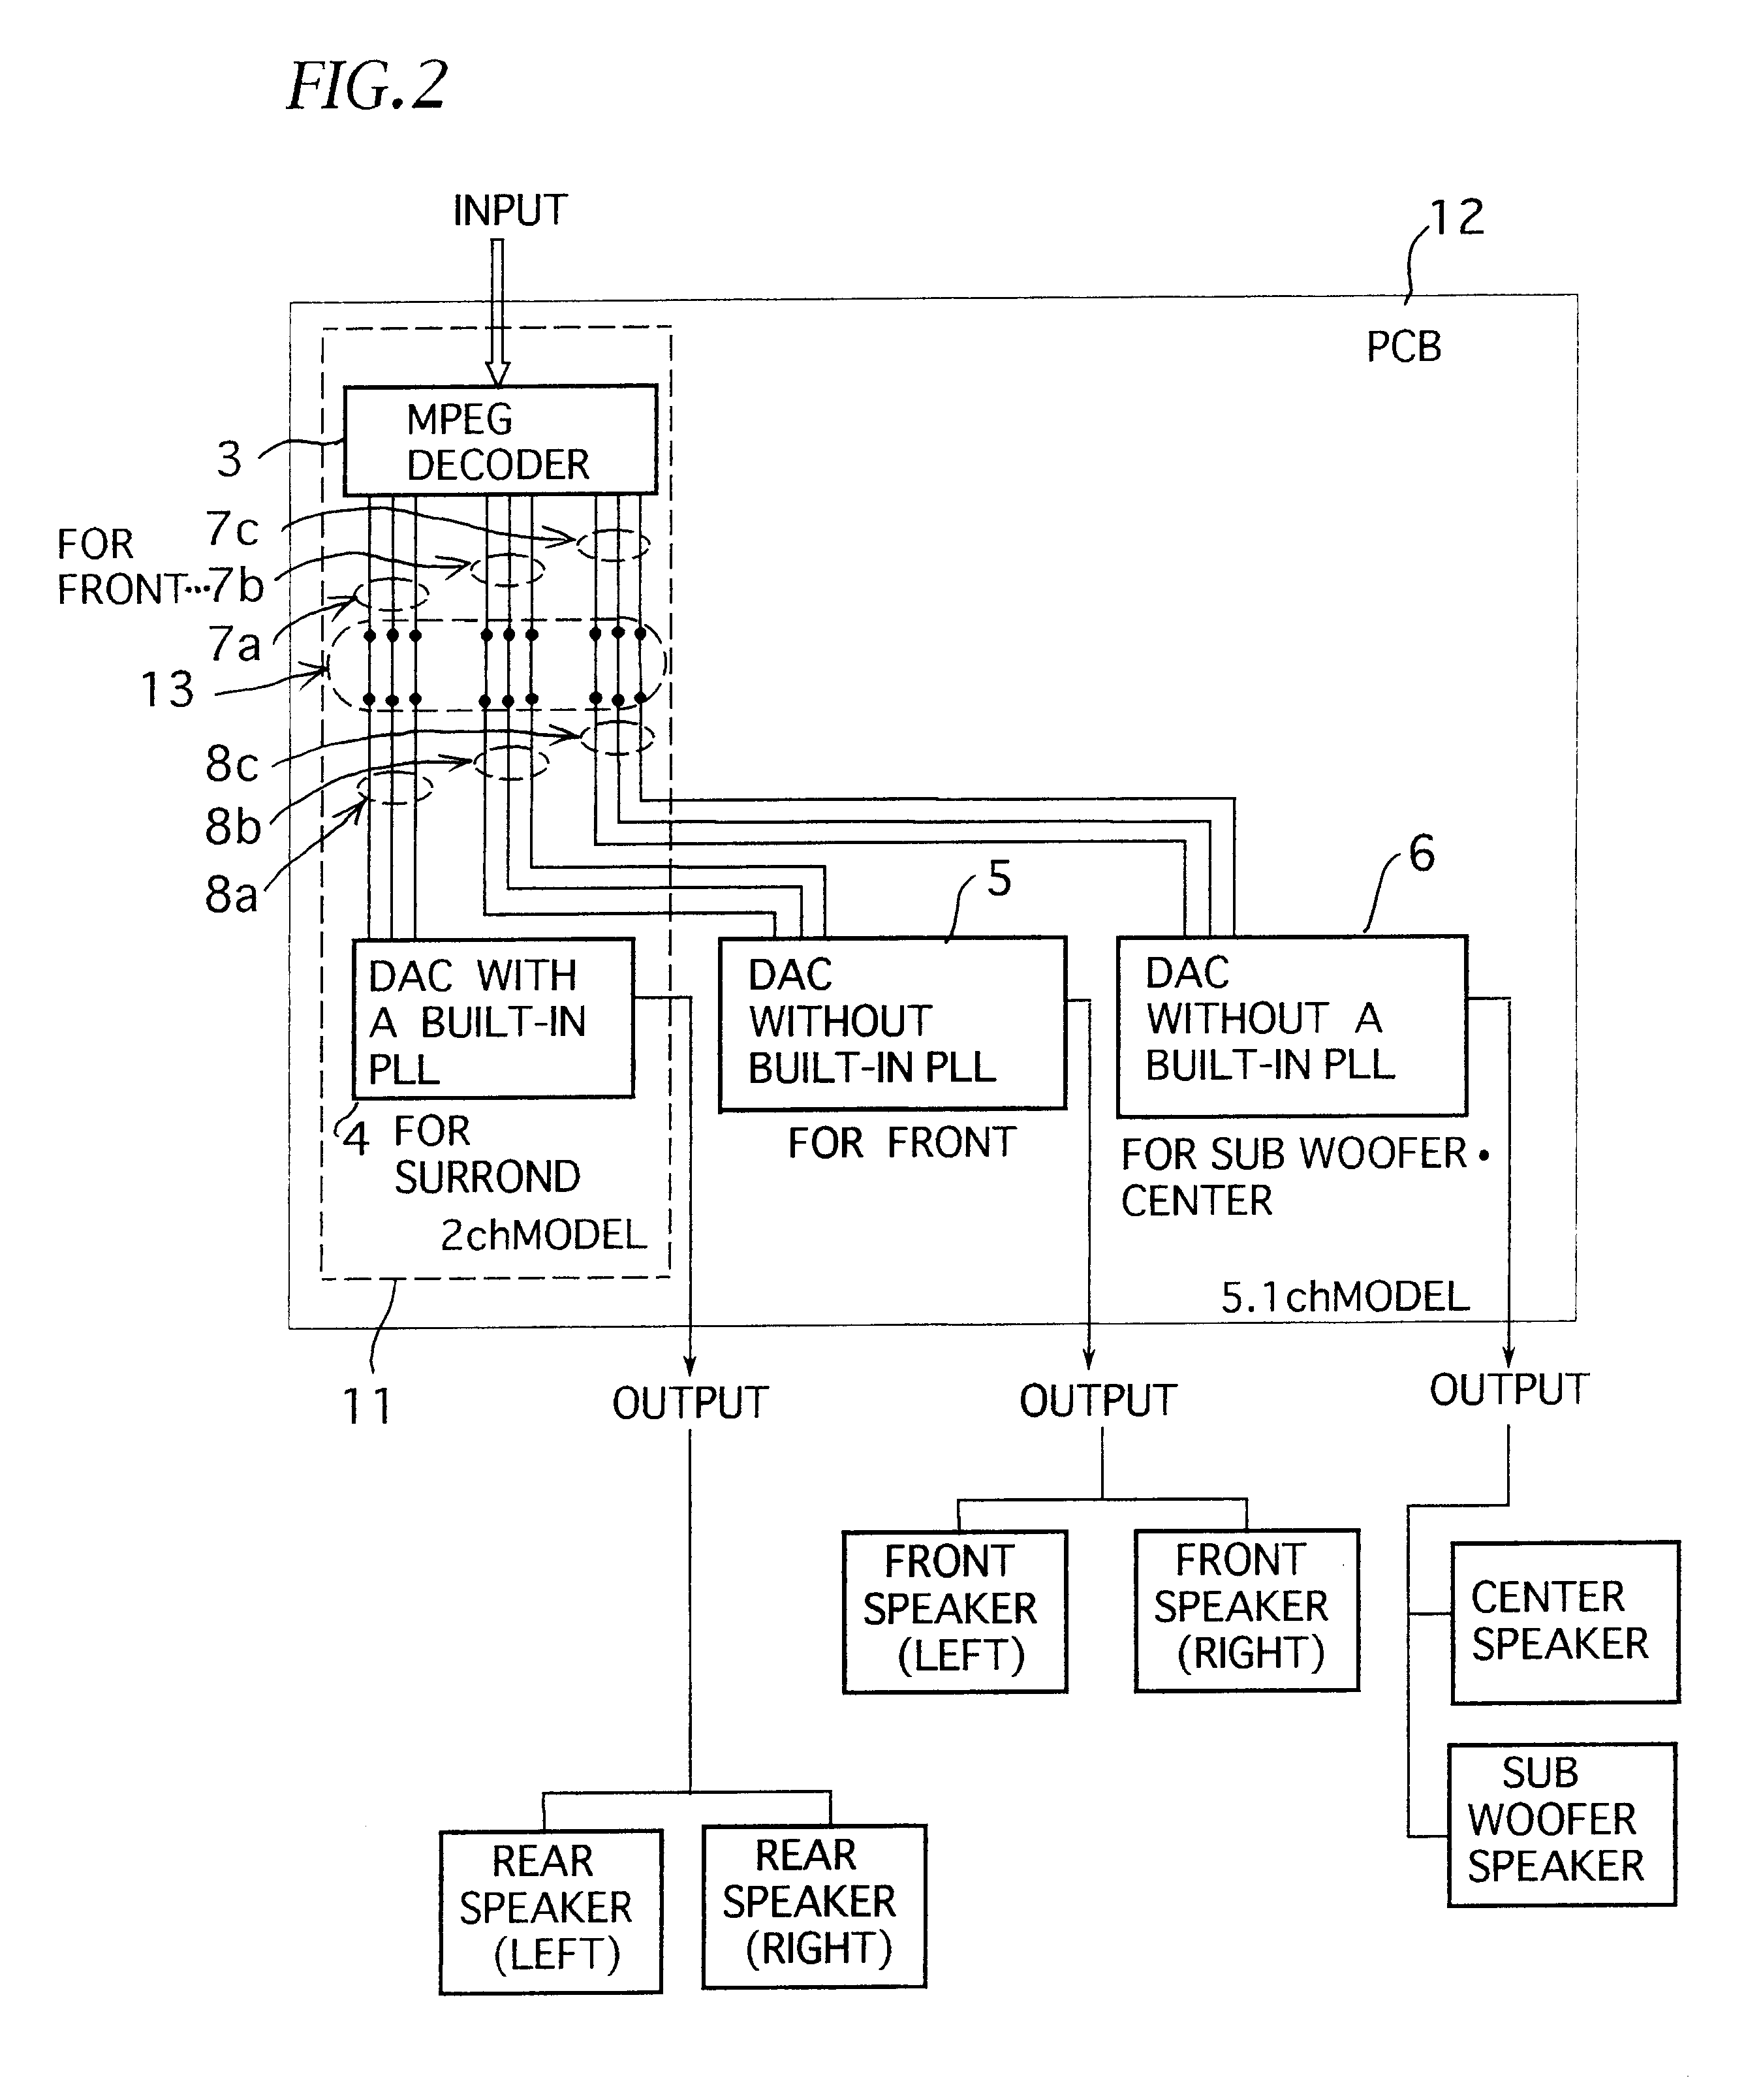 Audio-decoder apparatus using a common circuit substrate for a plurality of channel models